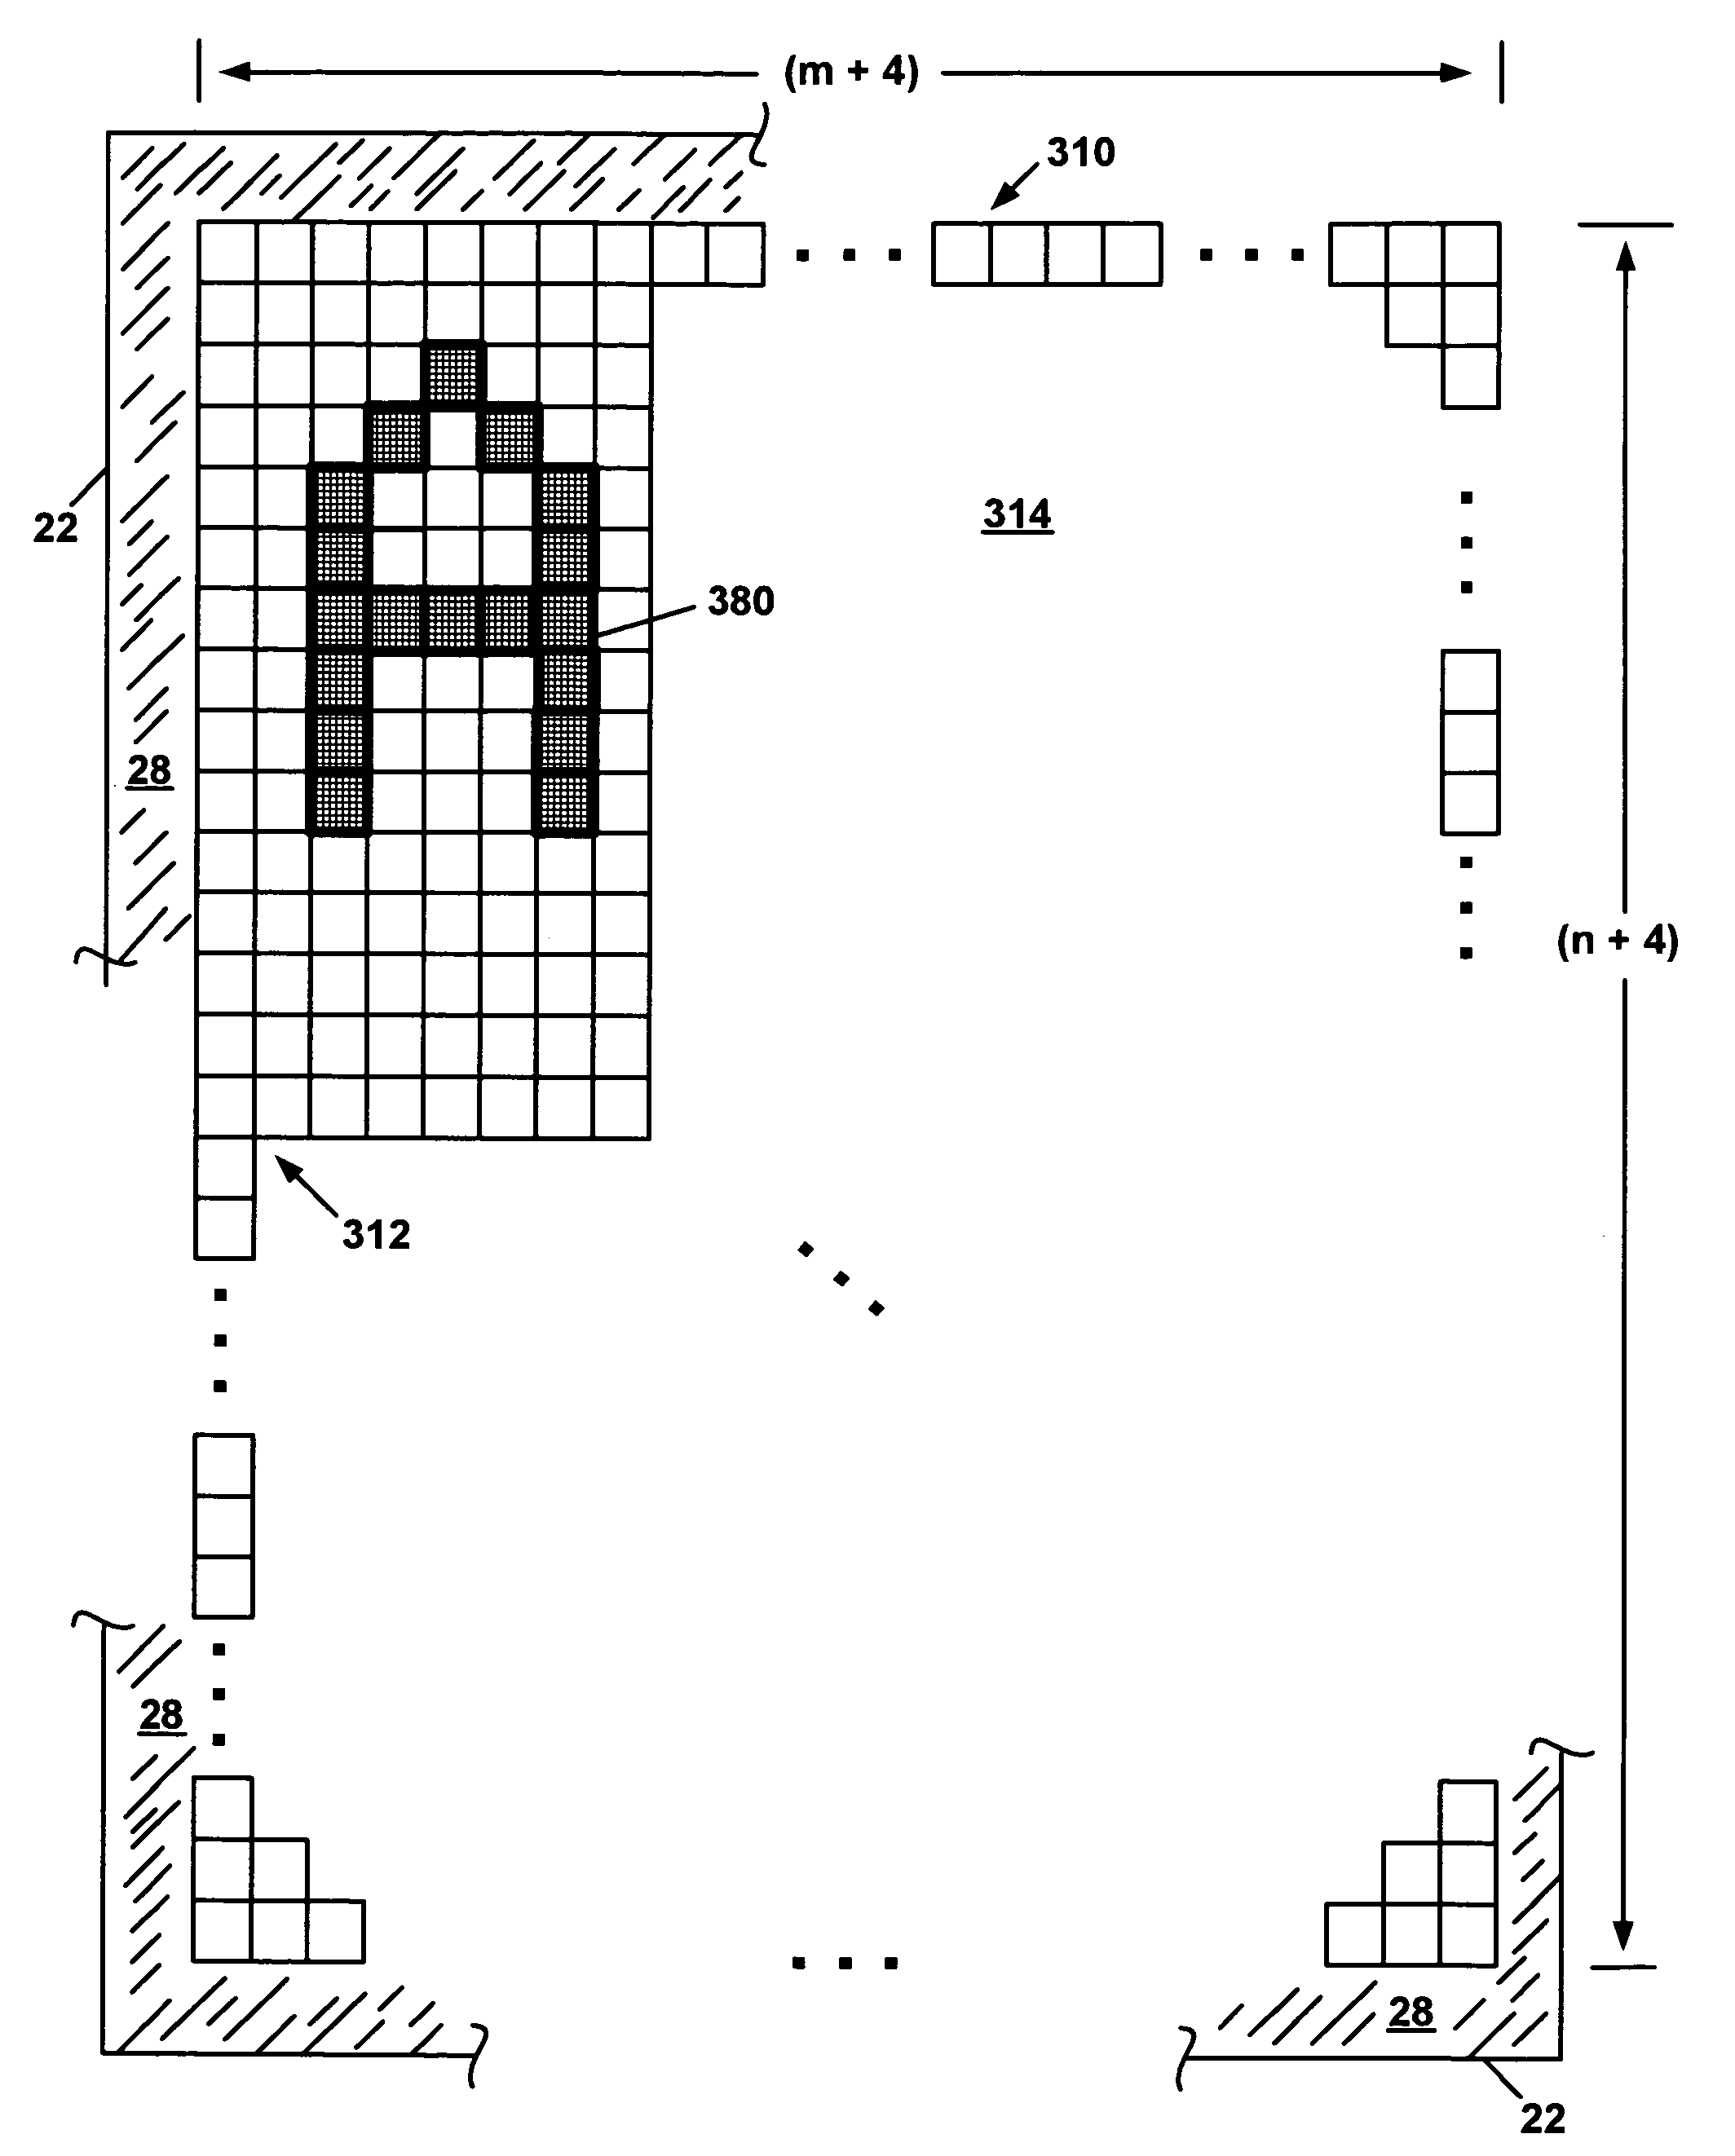 Pixel border for improved viewability of a display device